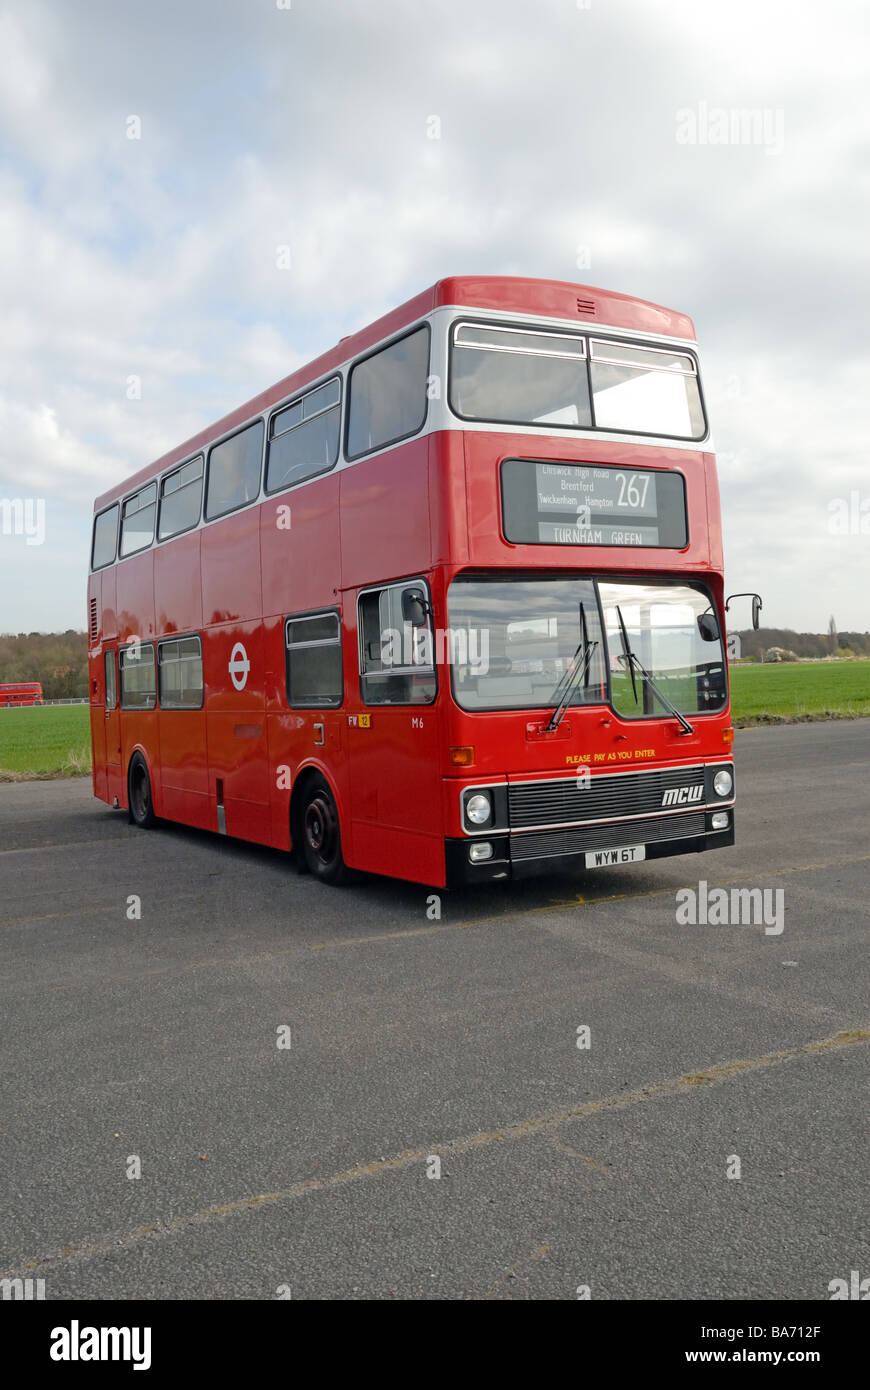 Three-quarter front view of WYW 6T 1979 M6 2M2 MCW Metrobus DR 101 MCW H43 28D the first production Metrobus for London at the Stock Photo